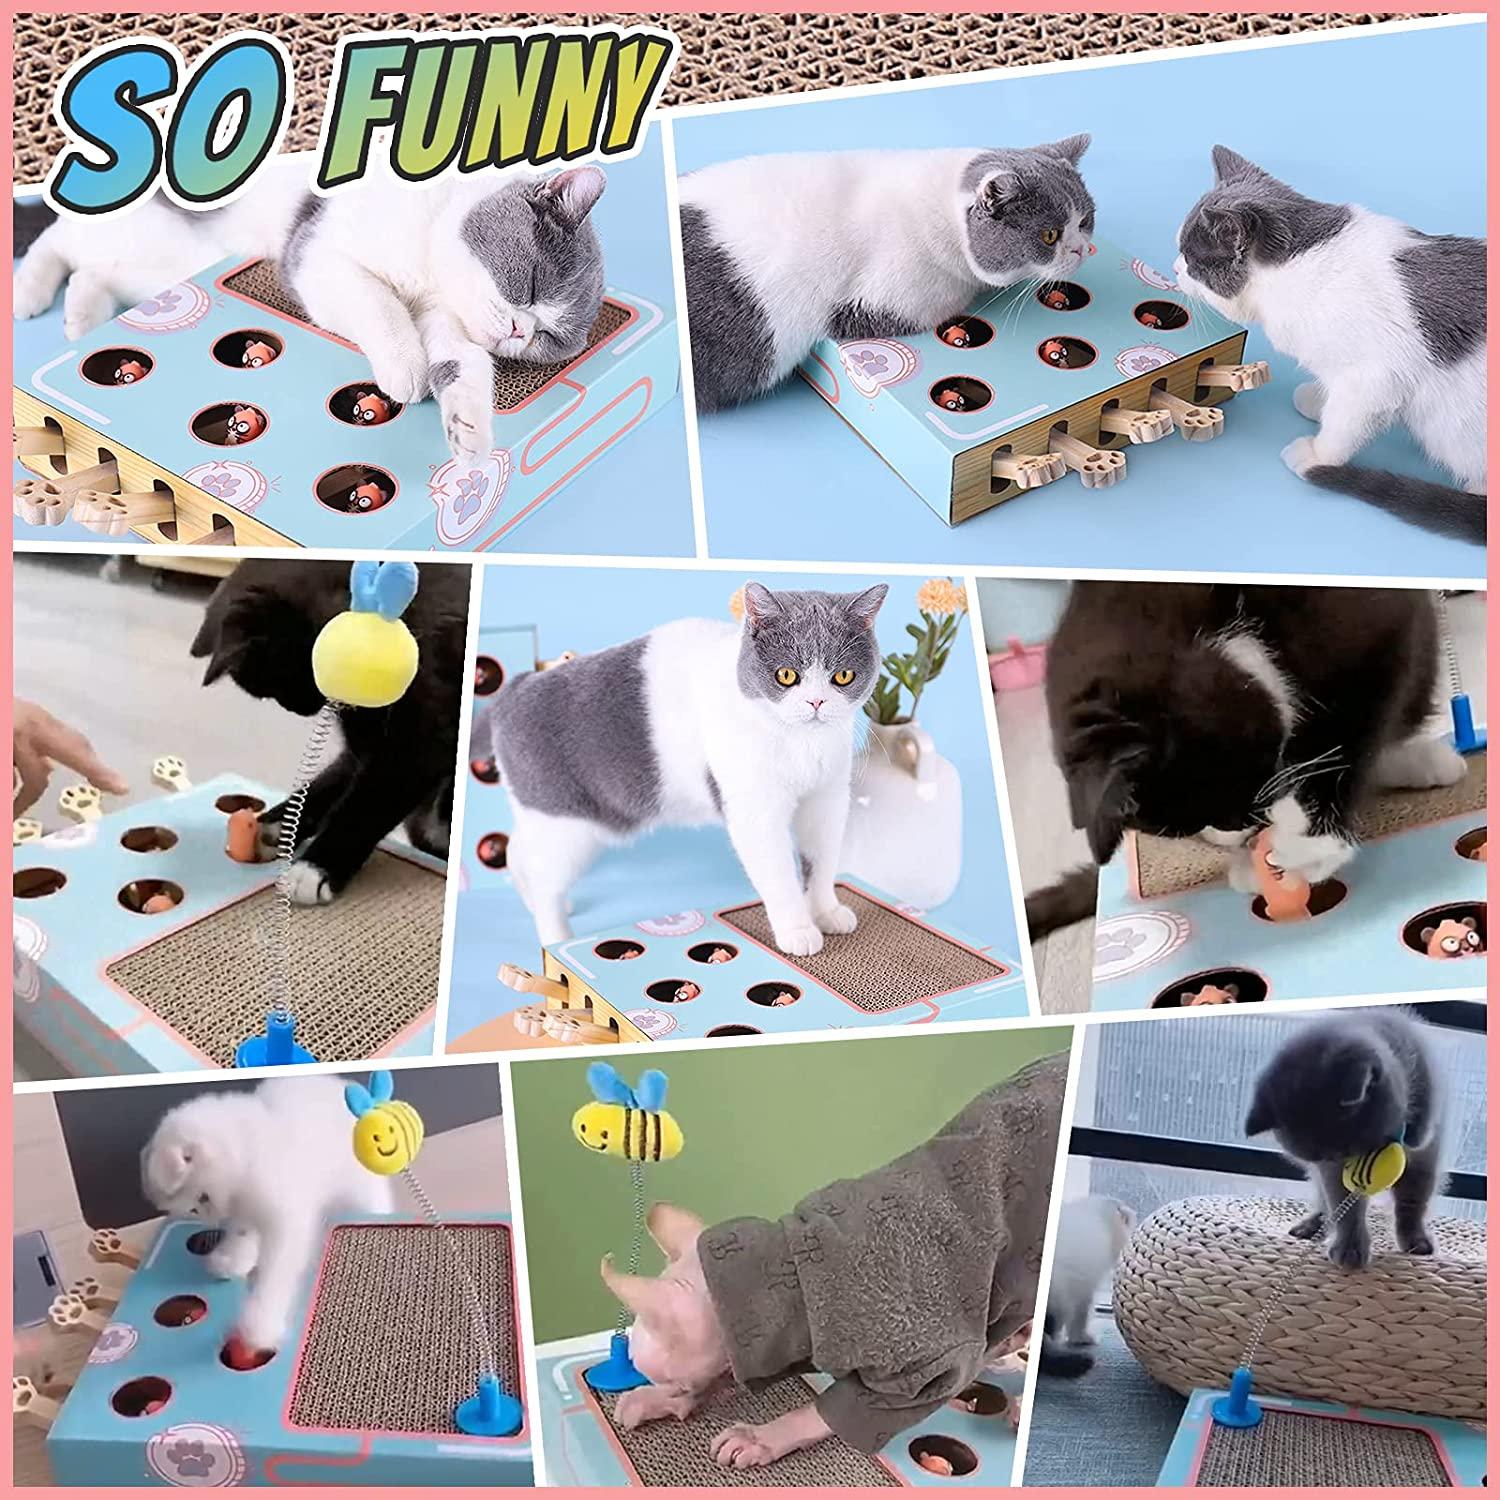 Cat Enrichment Toys for Indoor Cats, Whack a mole cat Toy with cat  Scratching pad, Cat Cardboard Box to Make Lots of Fun, cat Interactive Toy  to Relieve Boredom and Train IQ.